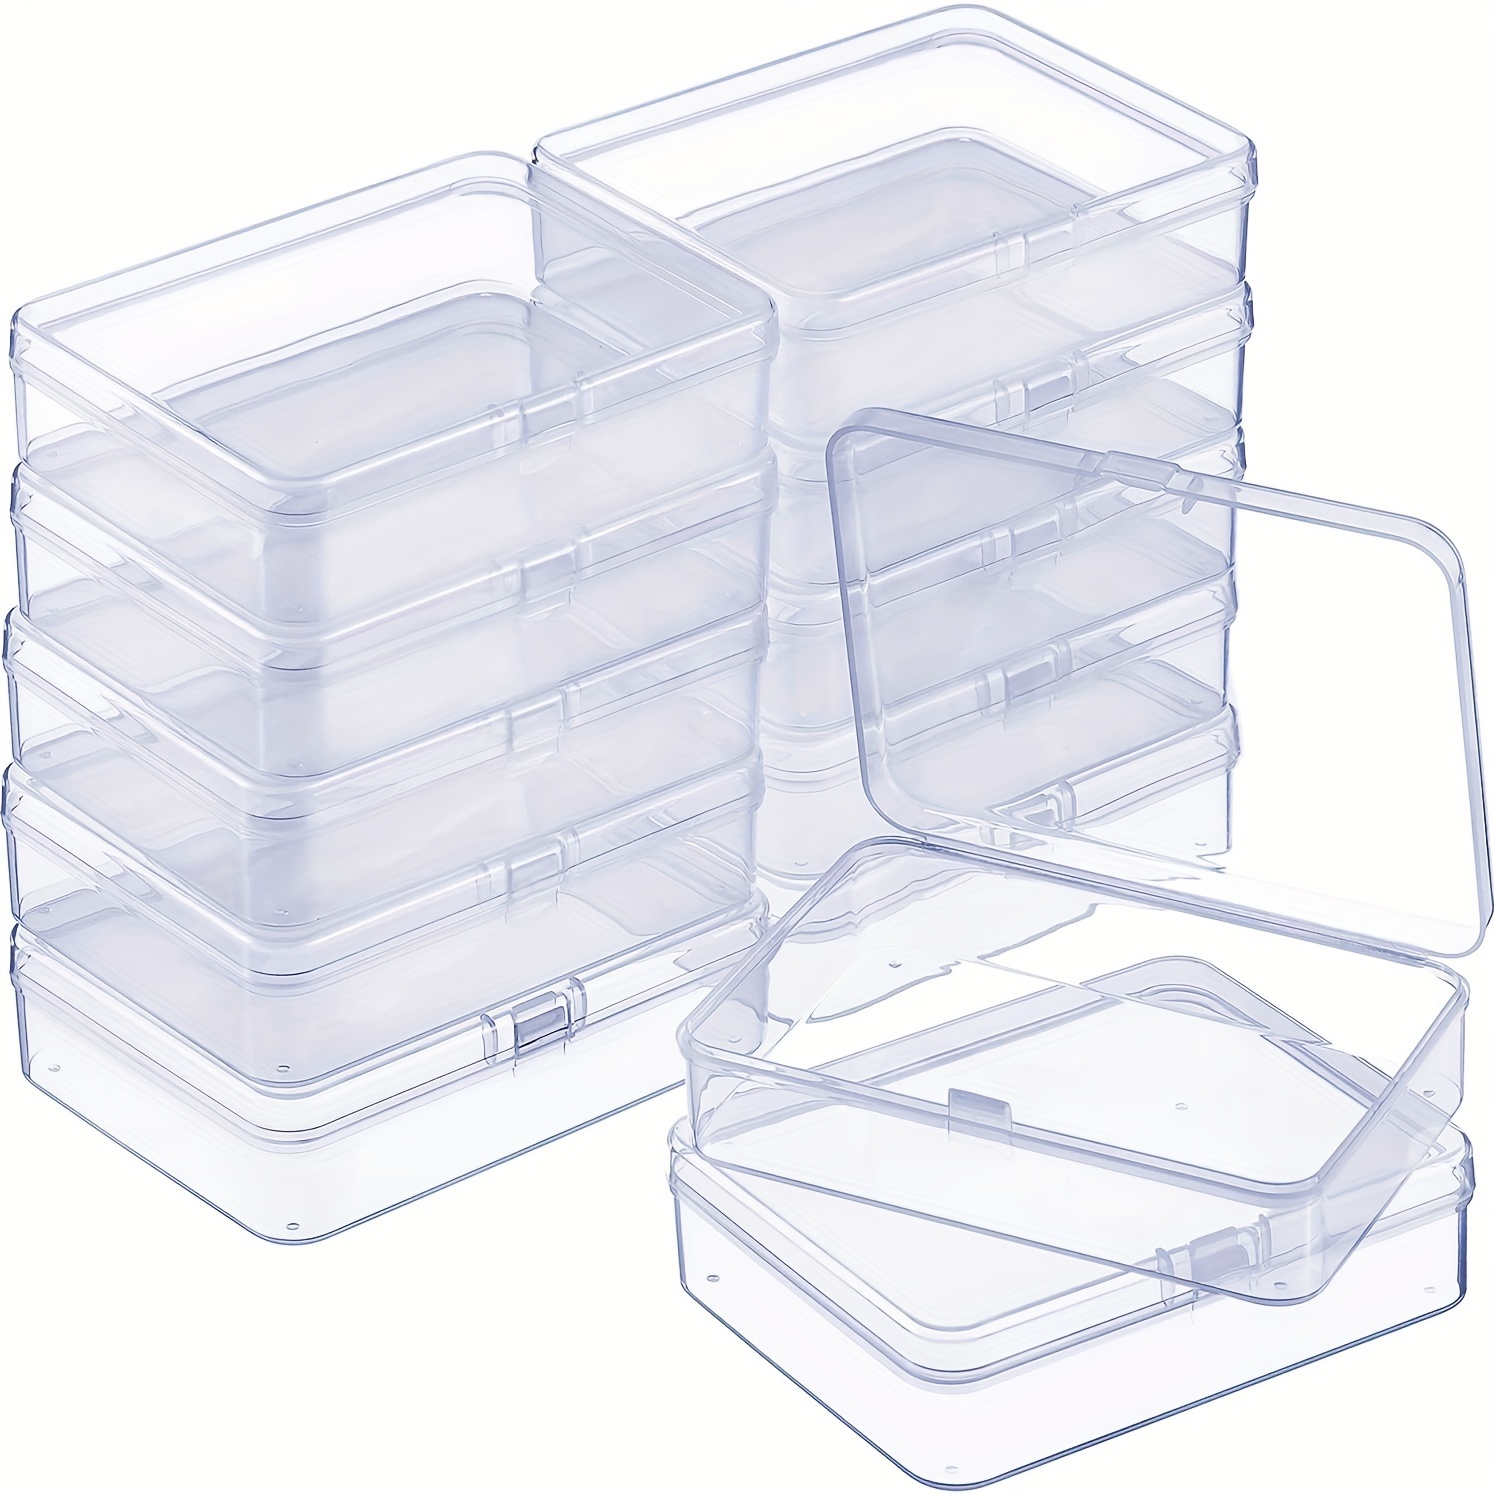 TDOTM 5 Layer Cylinder Stackable Transparent Round PS Plastic Storage Container Box Super Clear Accessories Organizer Box for Beads Crafts Other